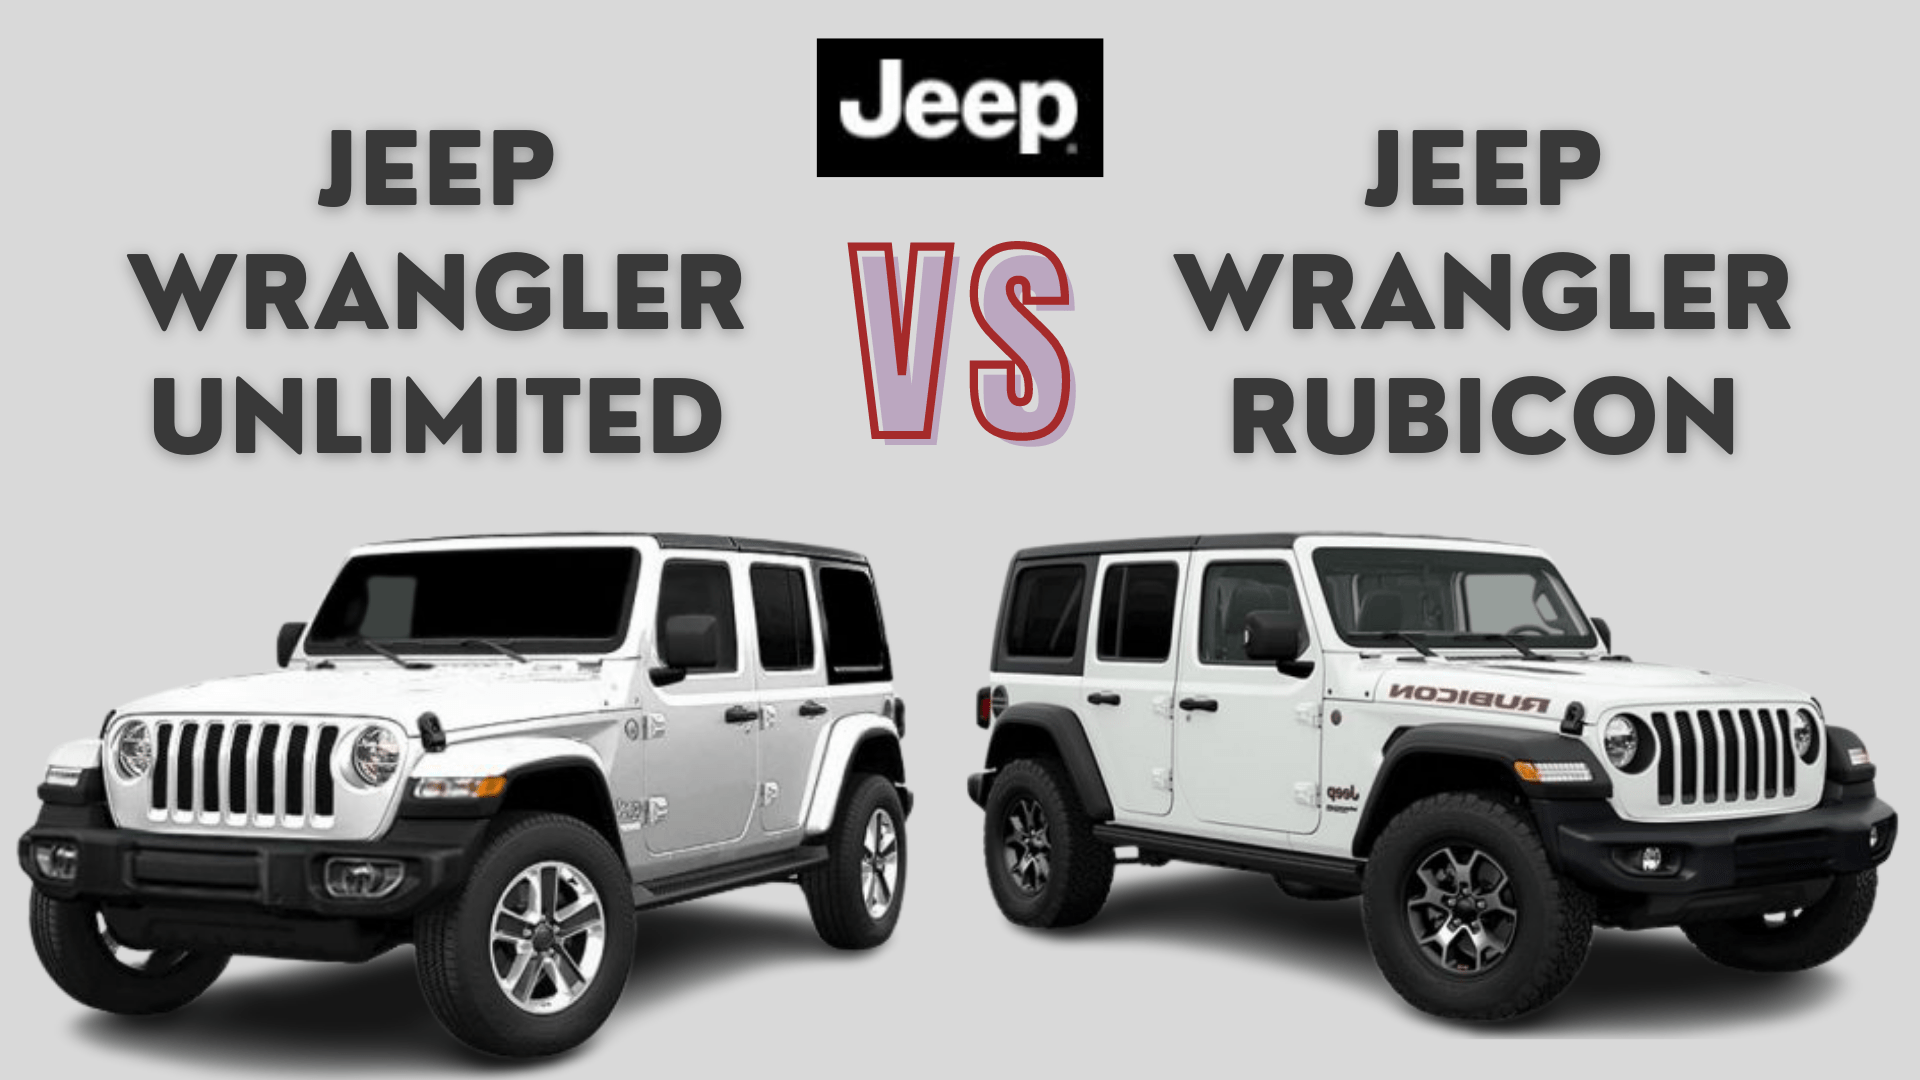 Arriba 80+ imagen what is the difference between a wrangler and a rubicon